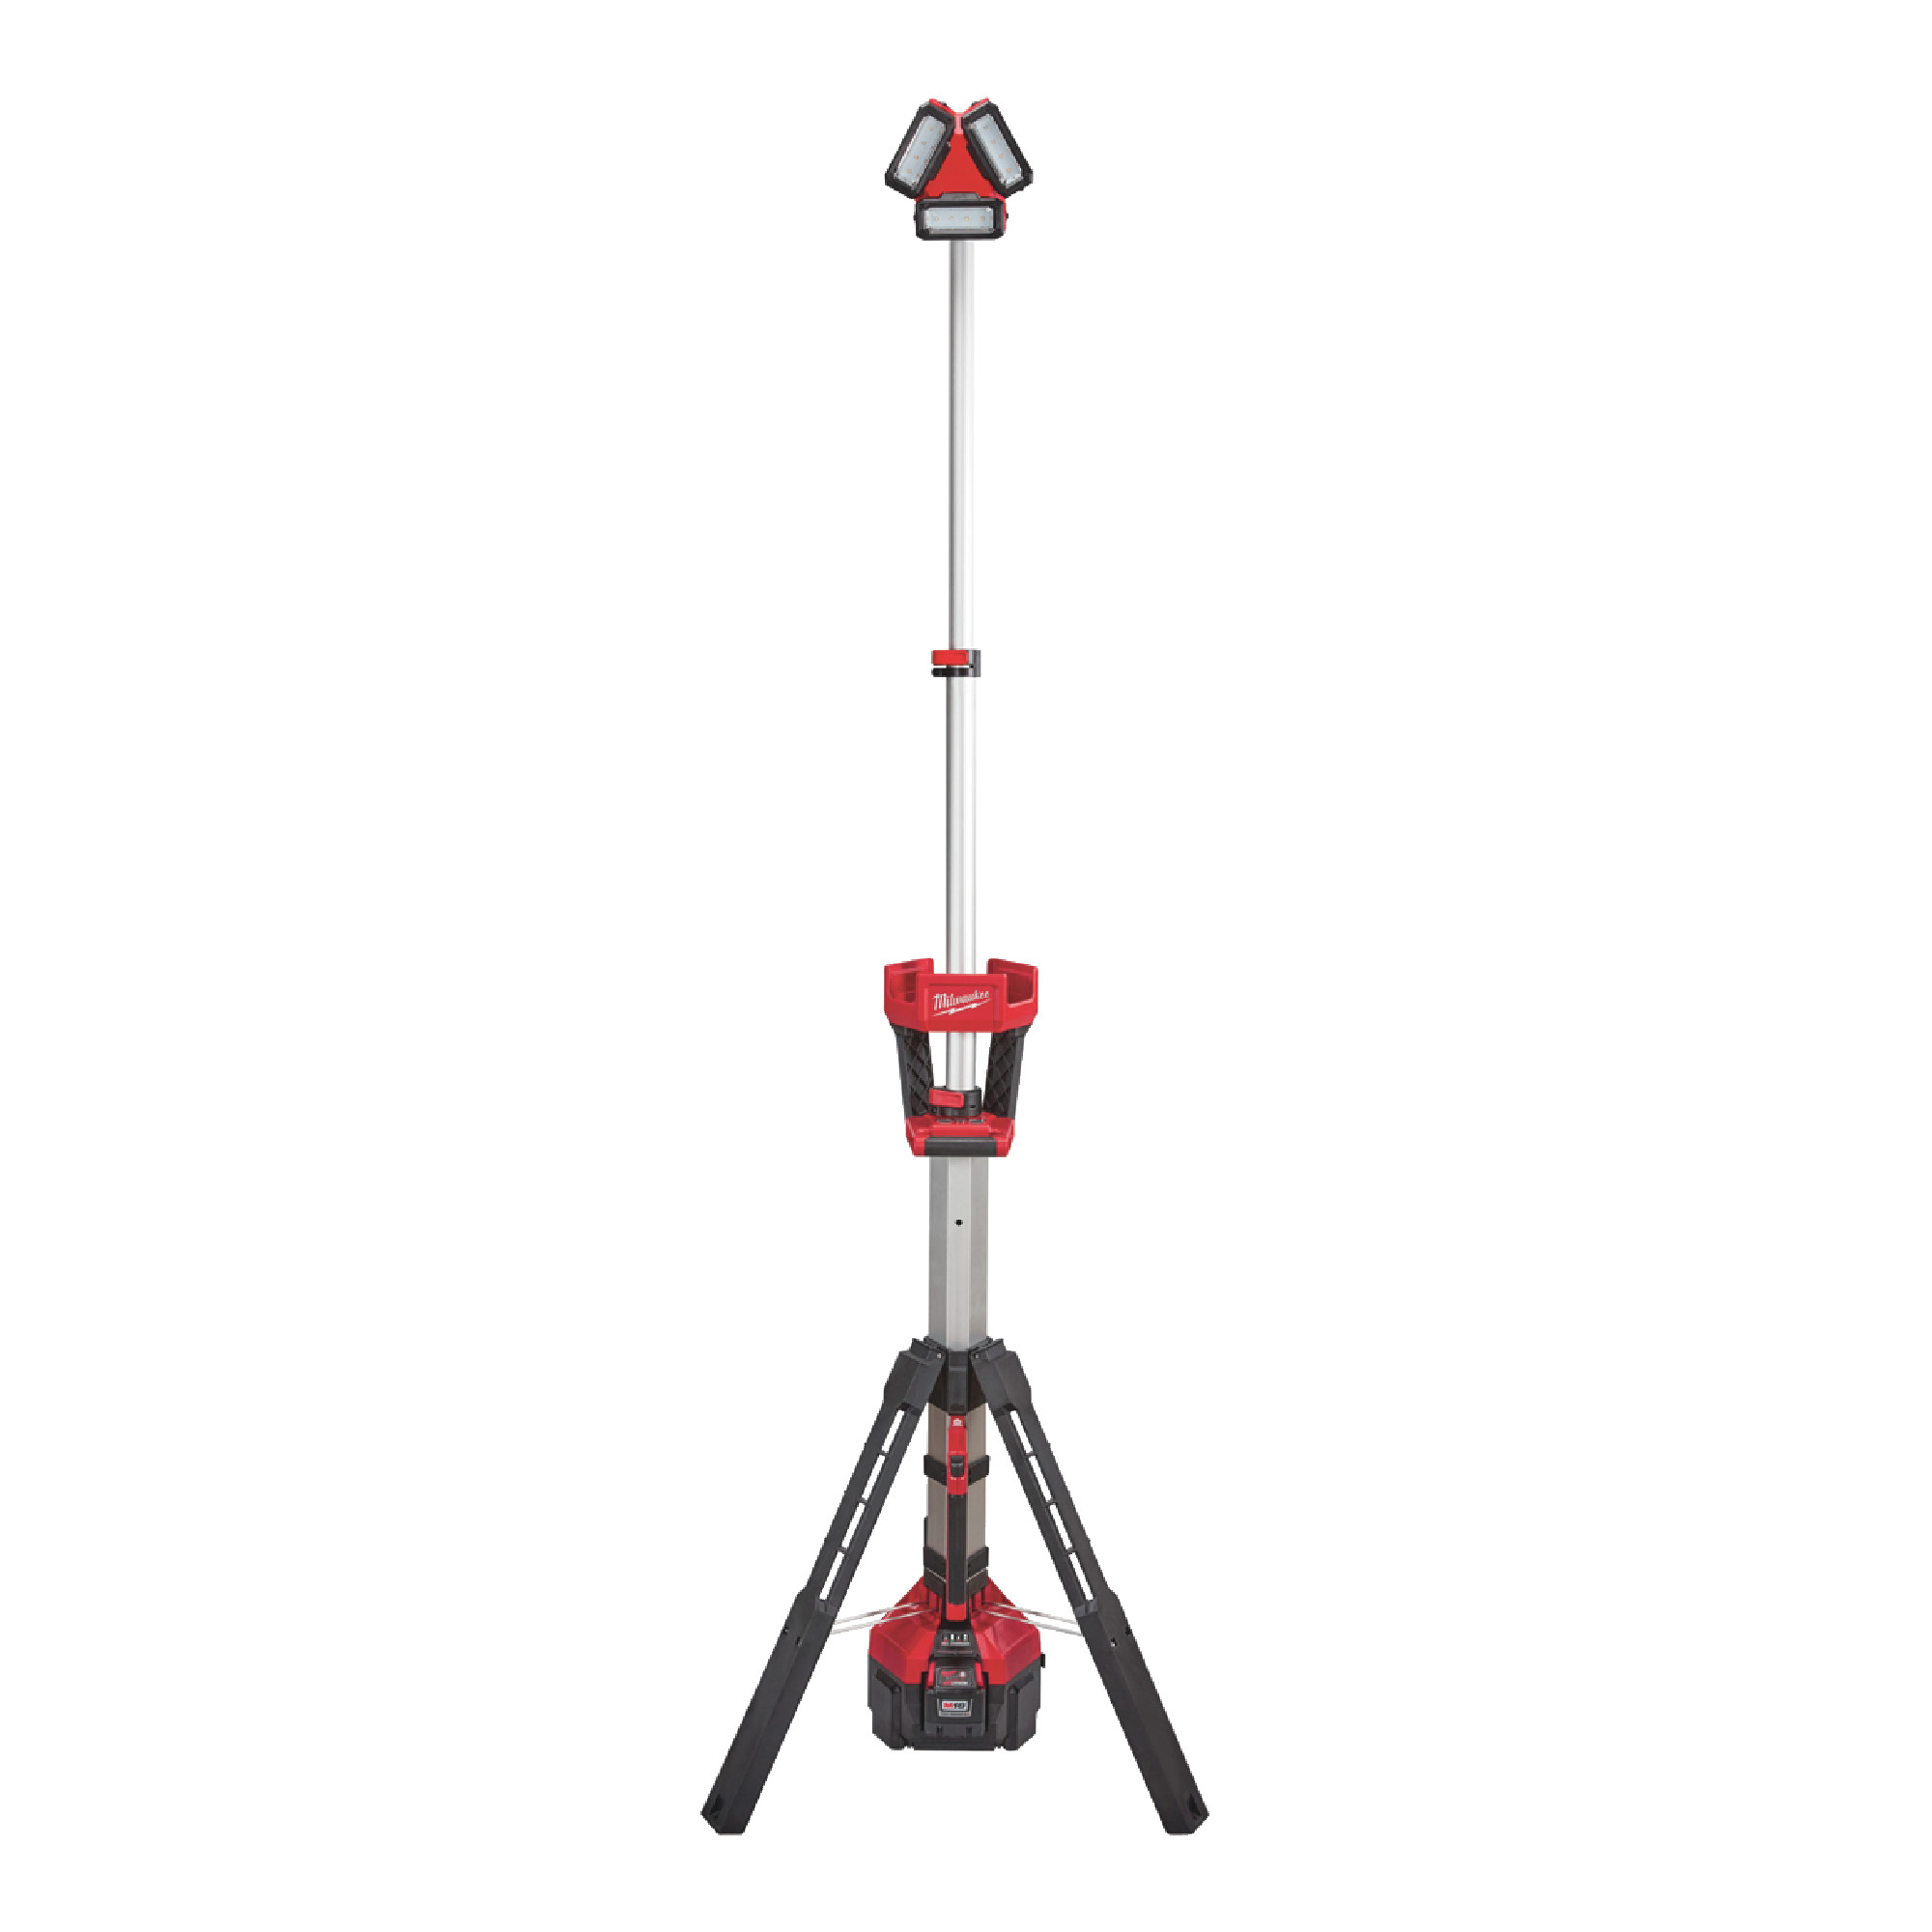 MILWAUKEE M18 ROCKET LED Tower Light/Charger (Tool Only) - Model : 2135-20  Volts:  18V